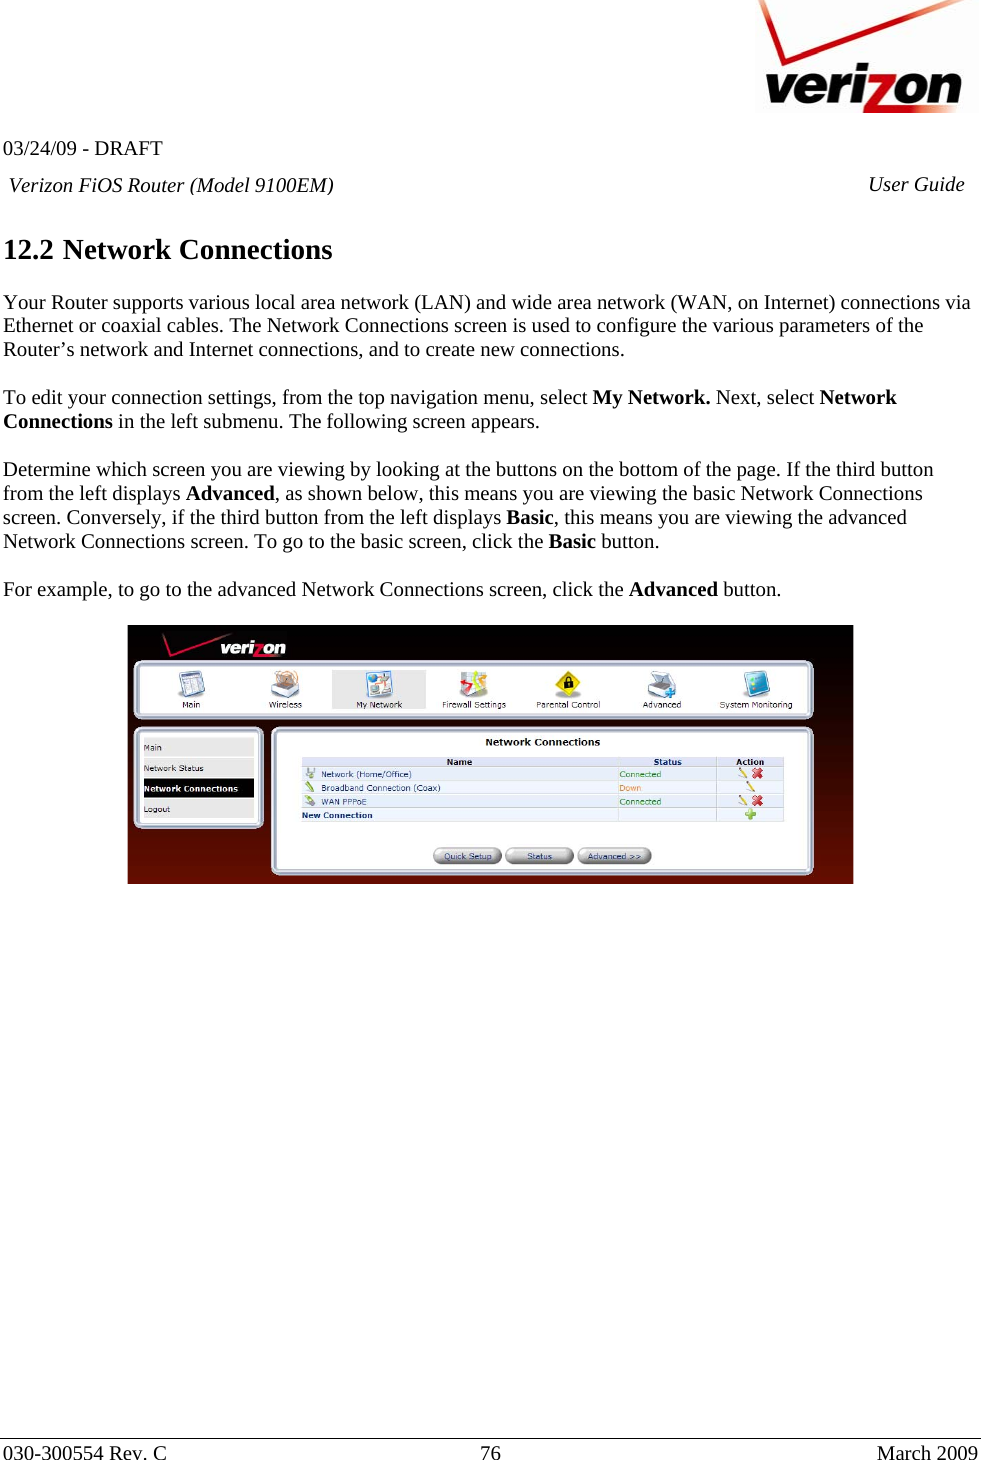   03/24/09 - DRAFT   030-300554 Rev. C  76      March 2009  Verizon FiOS Router (Model 9100EM) User Guide 12.2 Network Connections  Your Router supports various local area network (LAN) and wide area network (WAN, on Internet) connections via Ethernet or coaxial cables. The Network Connections screen is used to configure the various parameters of the Router’s network and Internet connections, and to create new connections.  To edit your connection settings, from the top navigation menu, select My Network. Next, select Network Connections in the left submenu. The following screen appears.   Determine which screen you are viewing by looking at the buttons on the bottom of the page. If the third button from the left displays Advanced, as shown below, this means you are viewing the basic Network Connections screen. Conversely, if the third button from the left displays Basic, this means you are viewing the advanced Network Connections screen. To go to the basic screen, click the Basic button.  For example, to go to the advanced Network Connections screen, click the Advanced button.                          